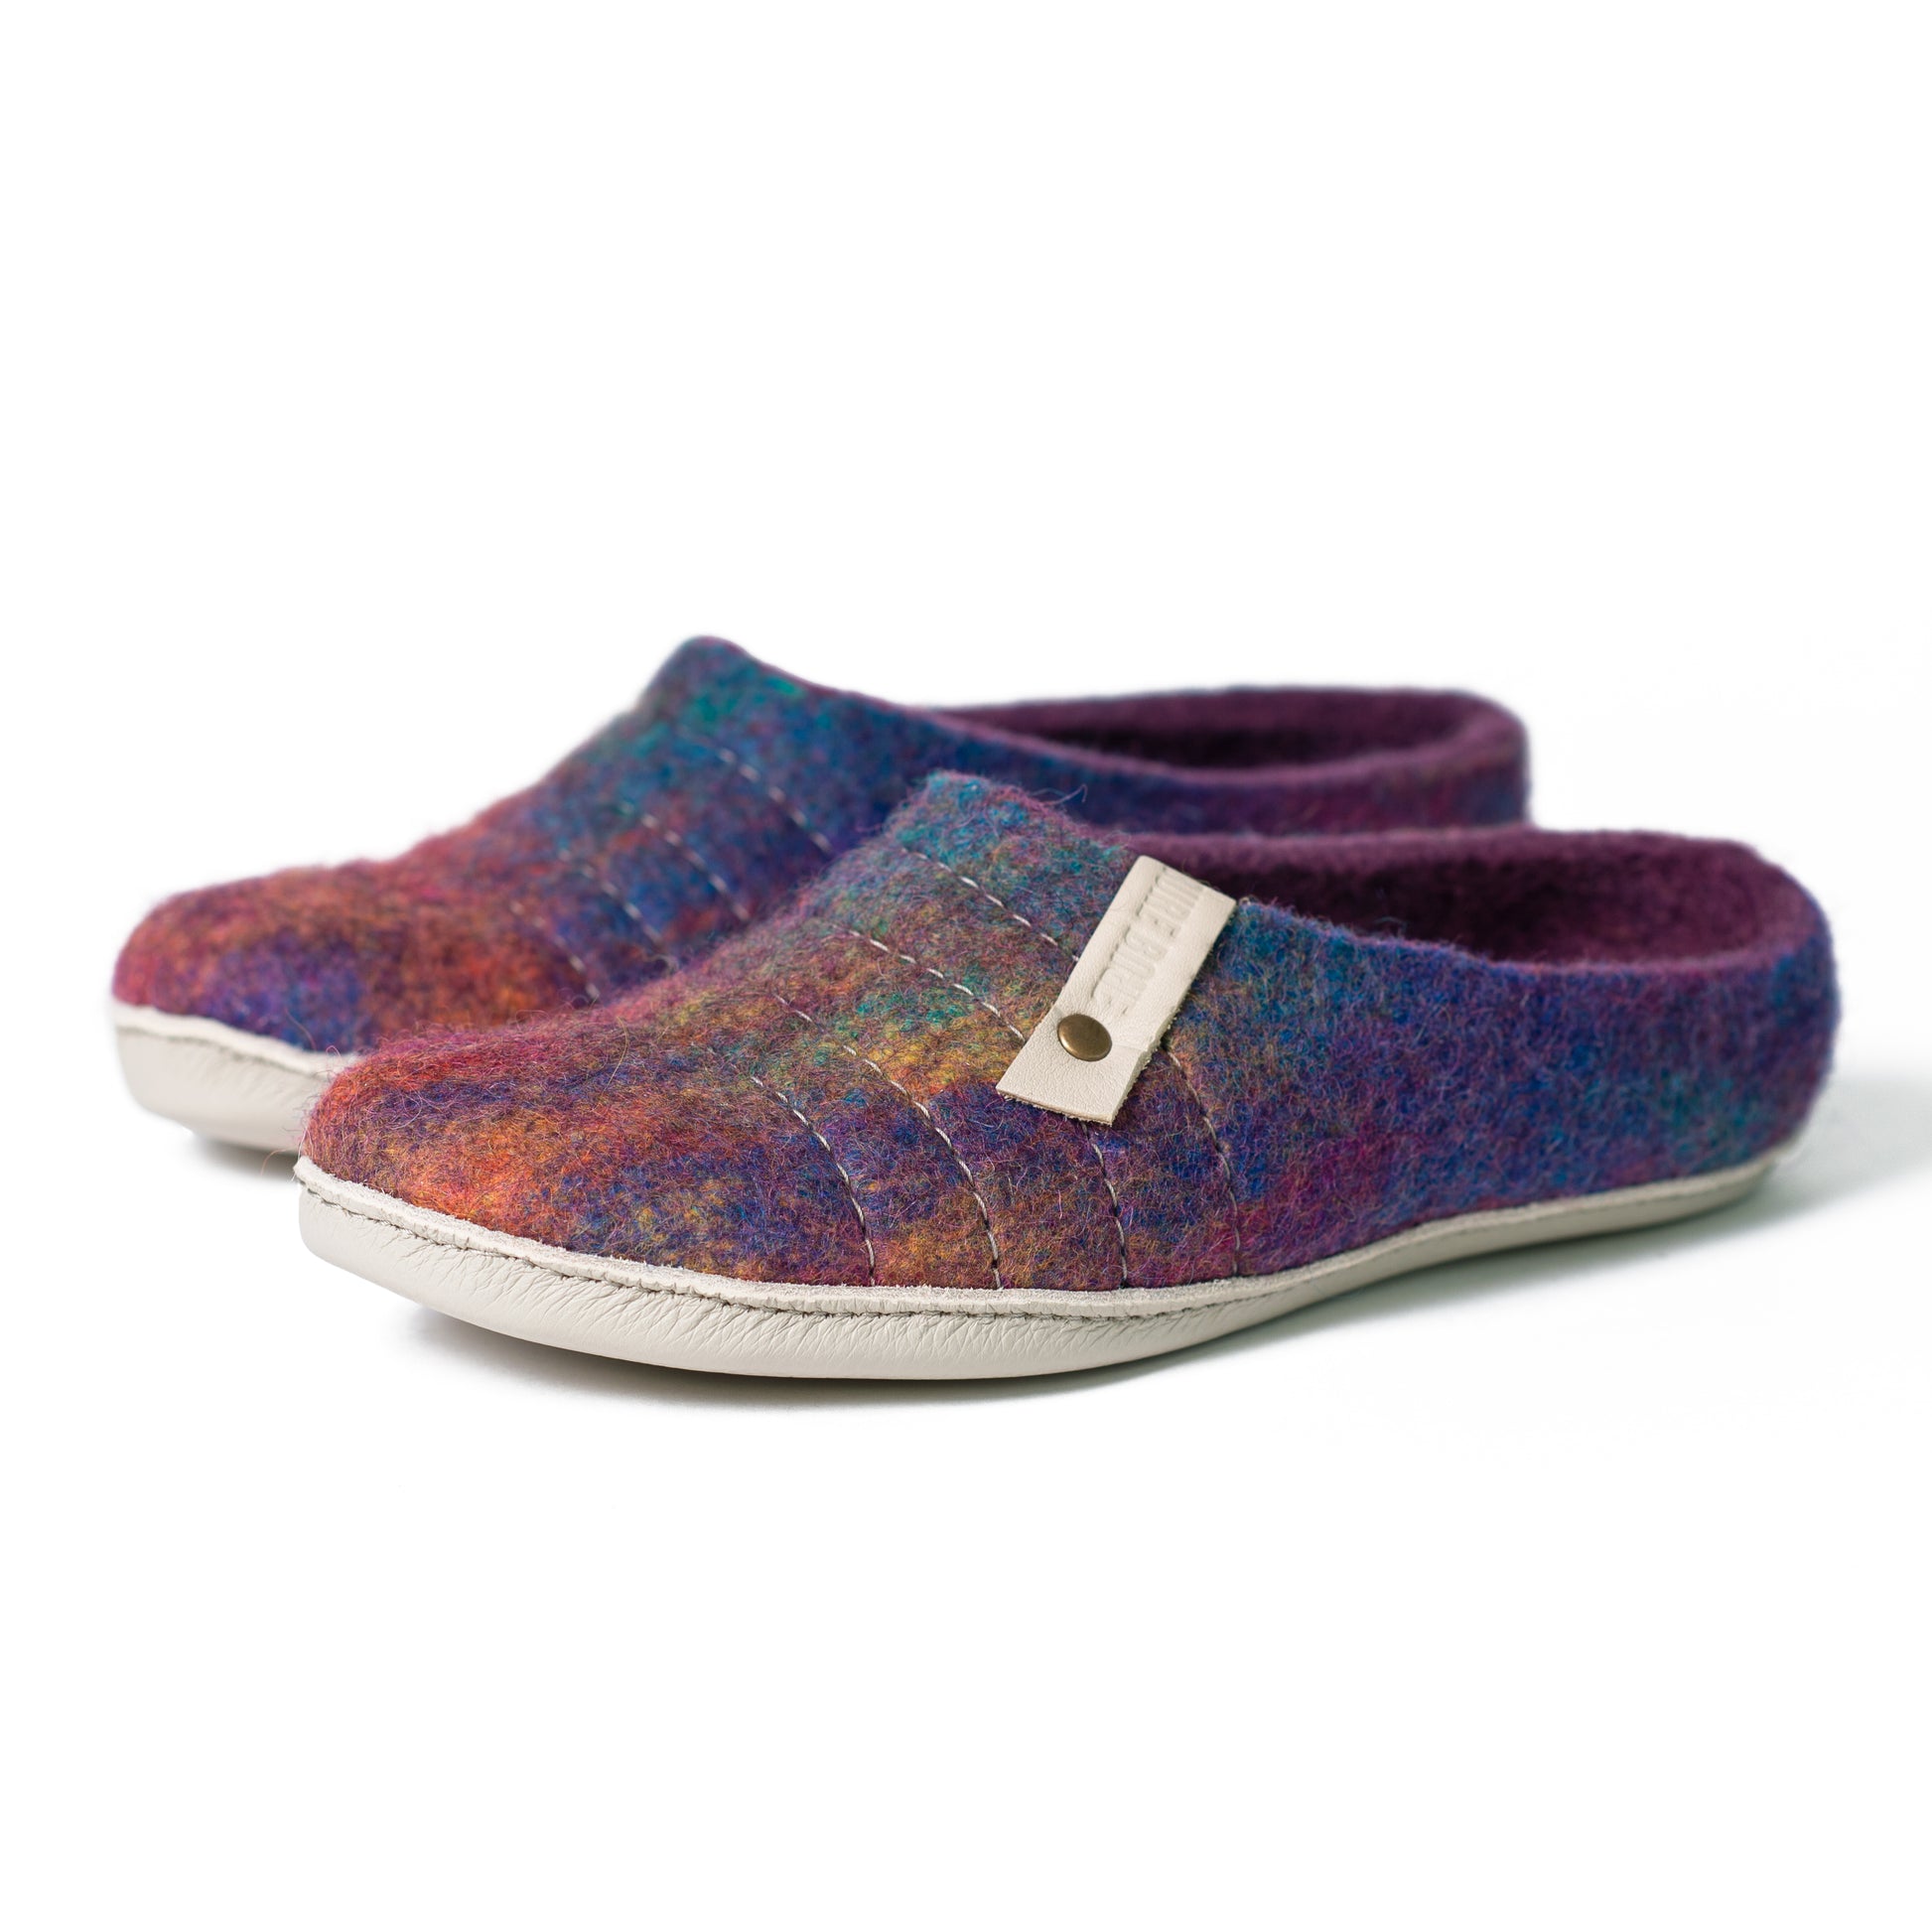 Purple Rainbow Low Cut Felted Wool Clogs for Women with White Recycled Leather Soles - Cocoon collection